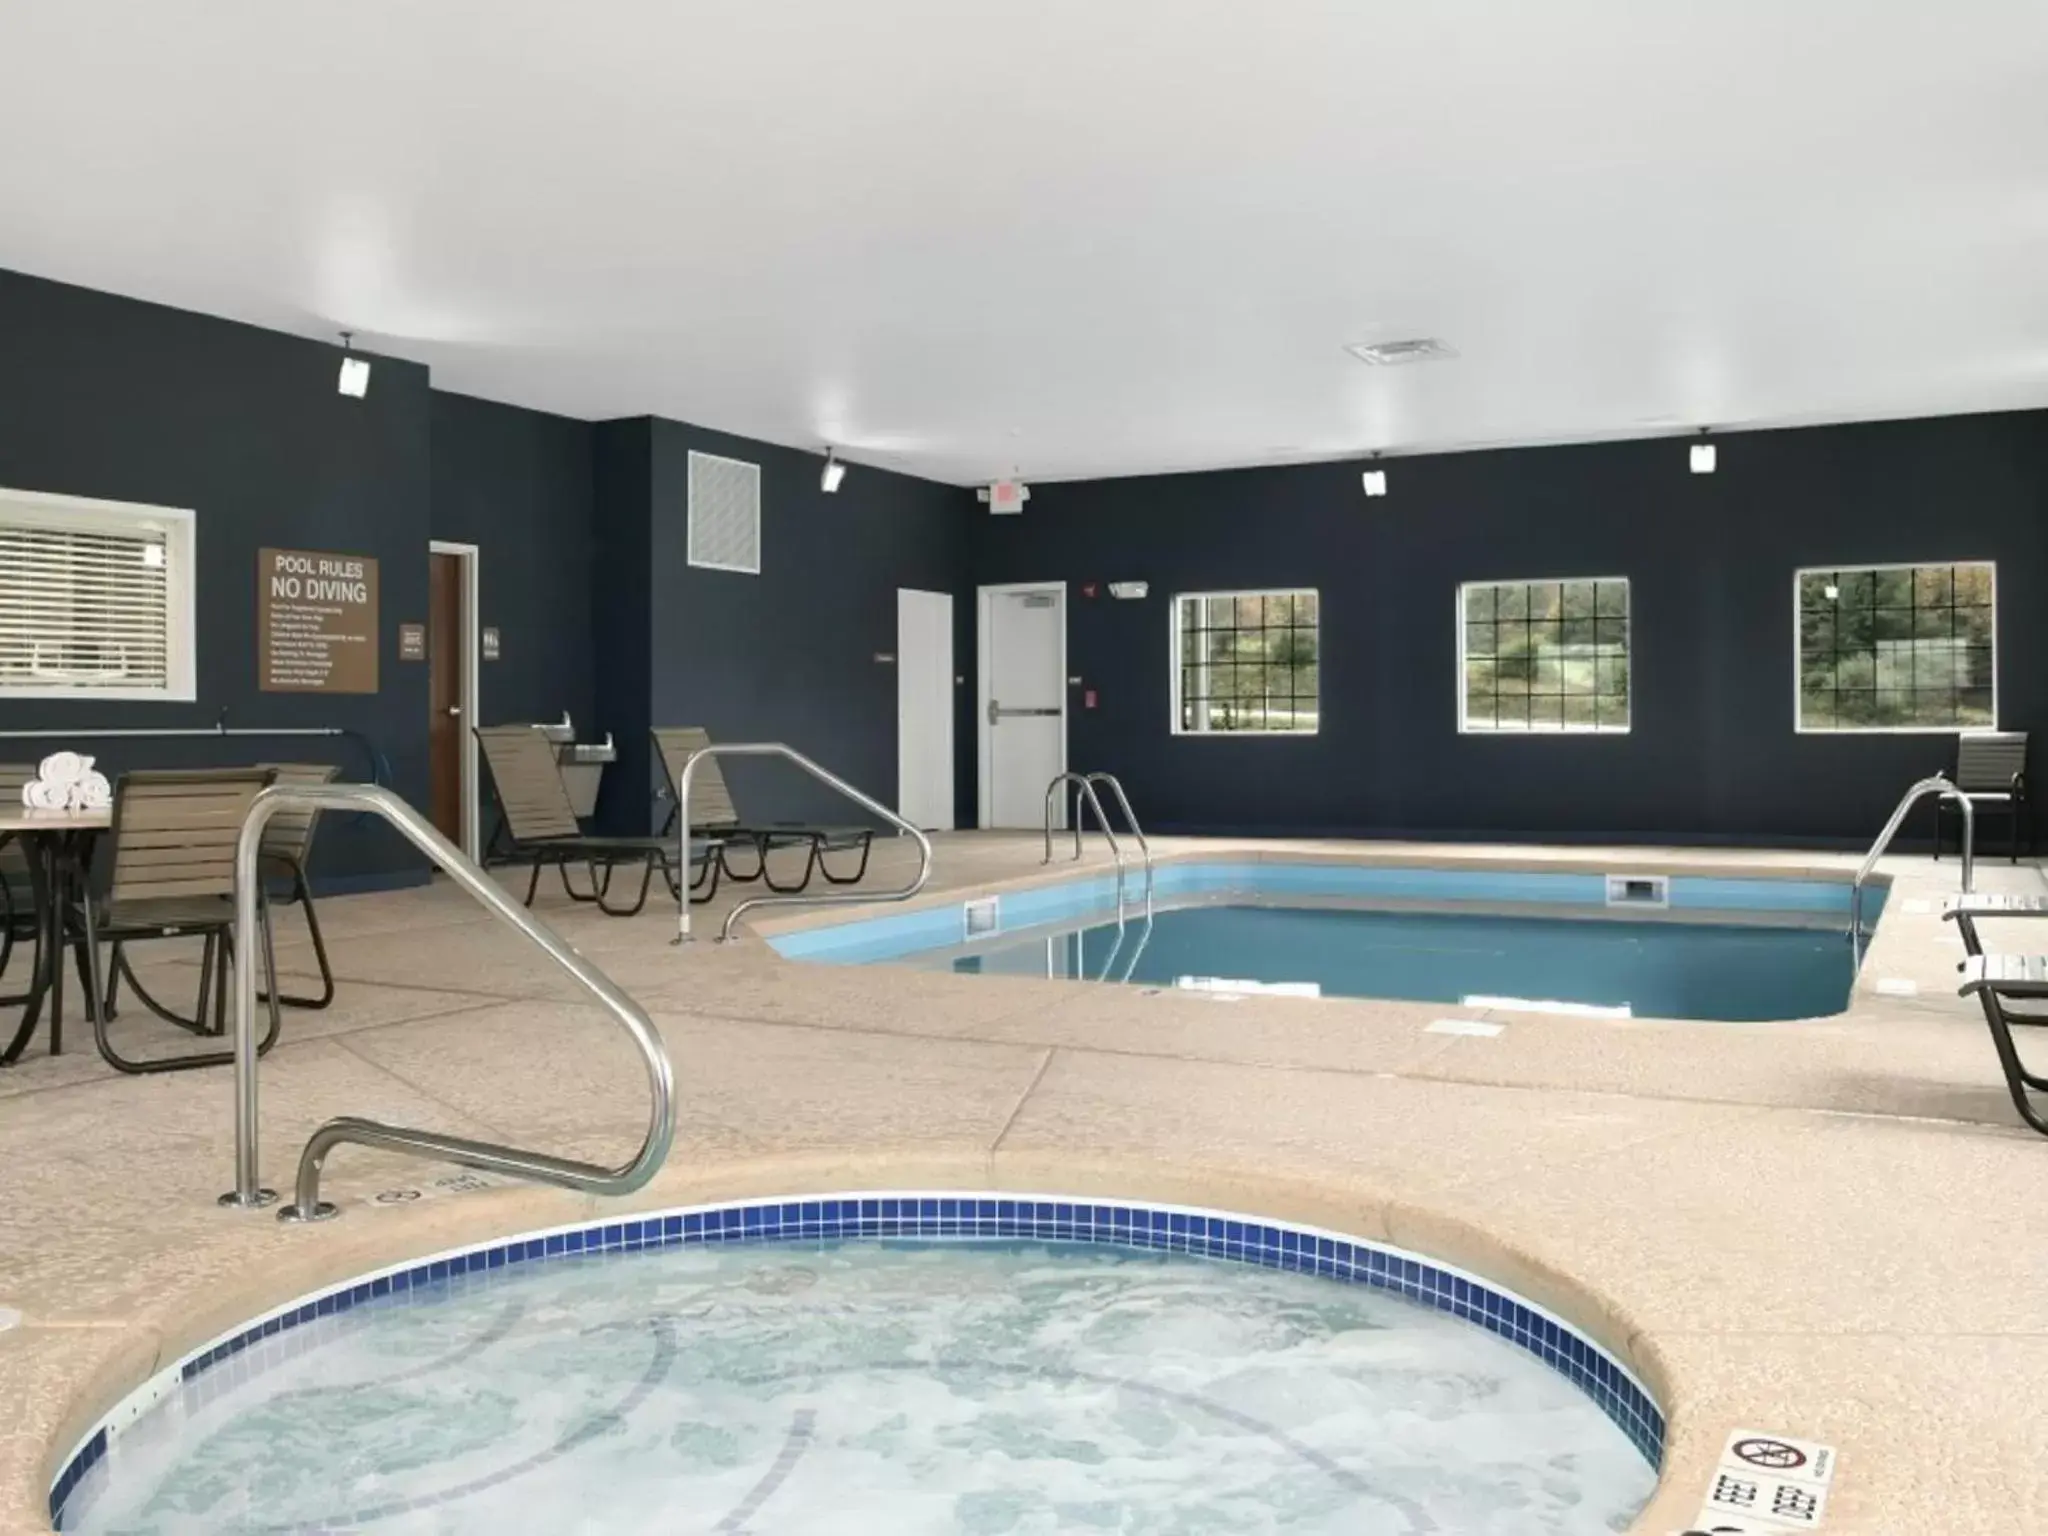 Hot Tub, Swimming Pool in Microtel Inn & Suites Mansfield PA